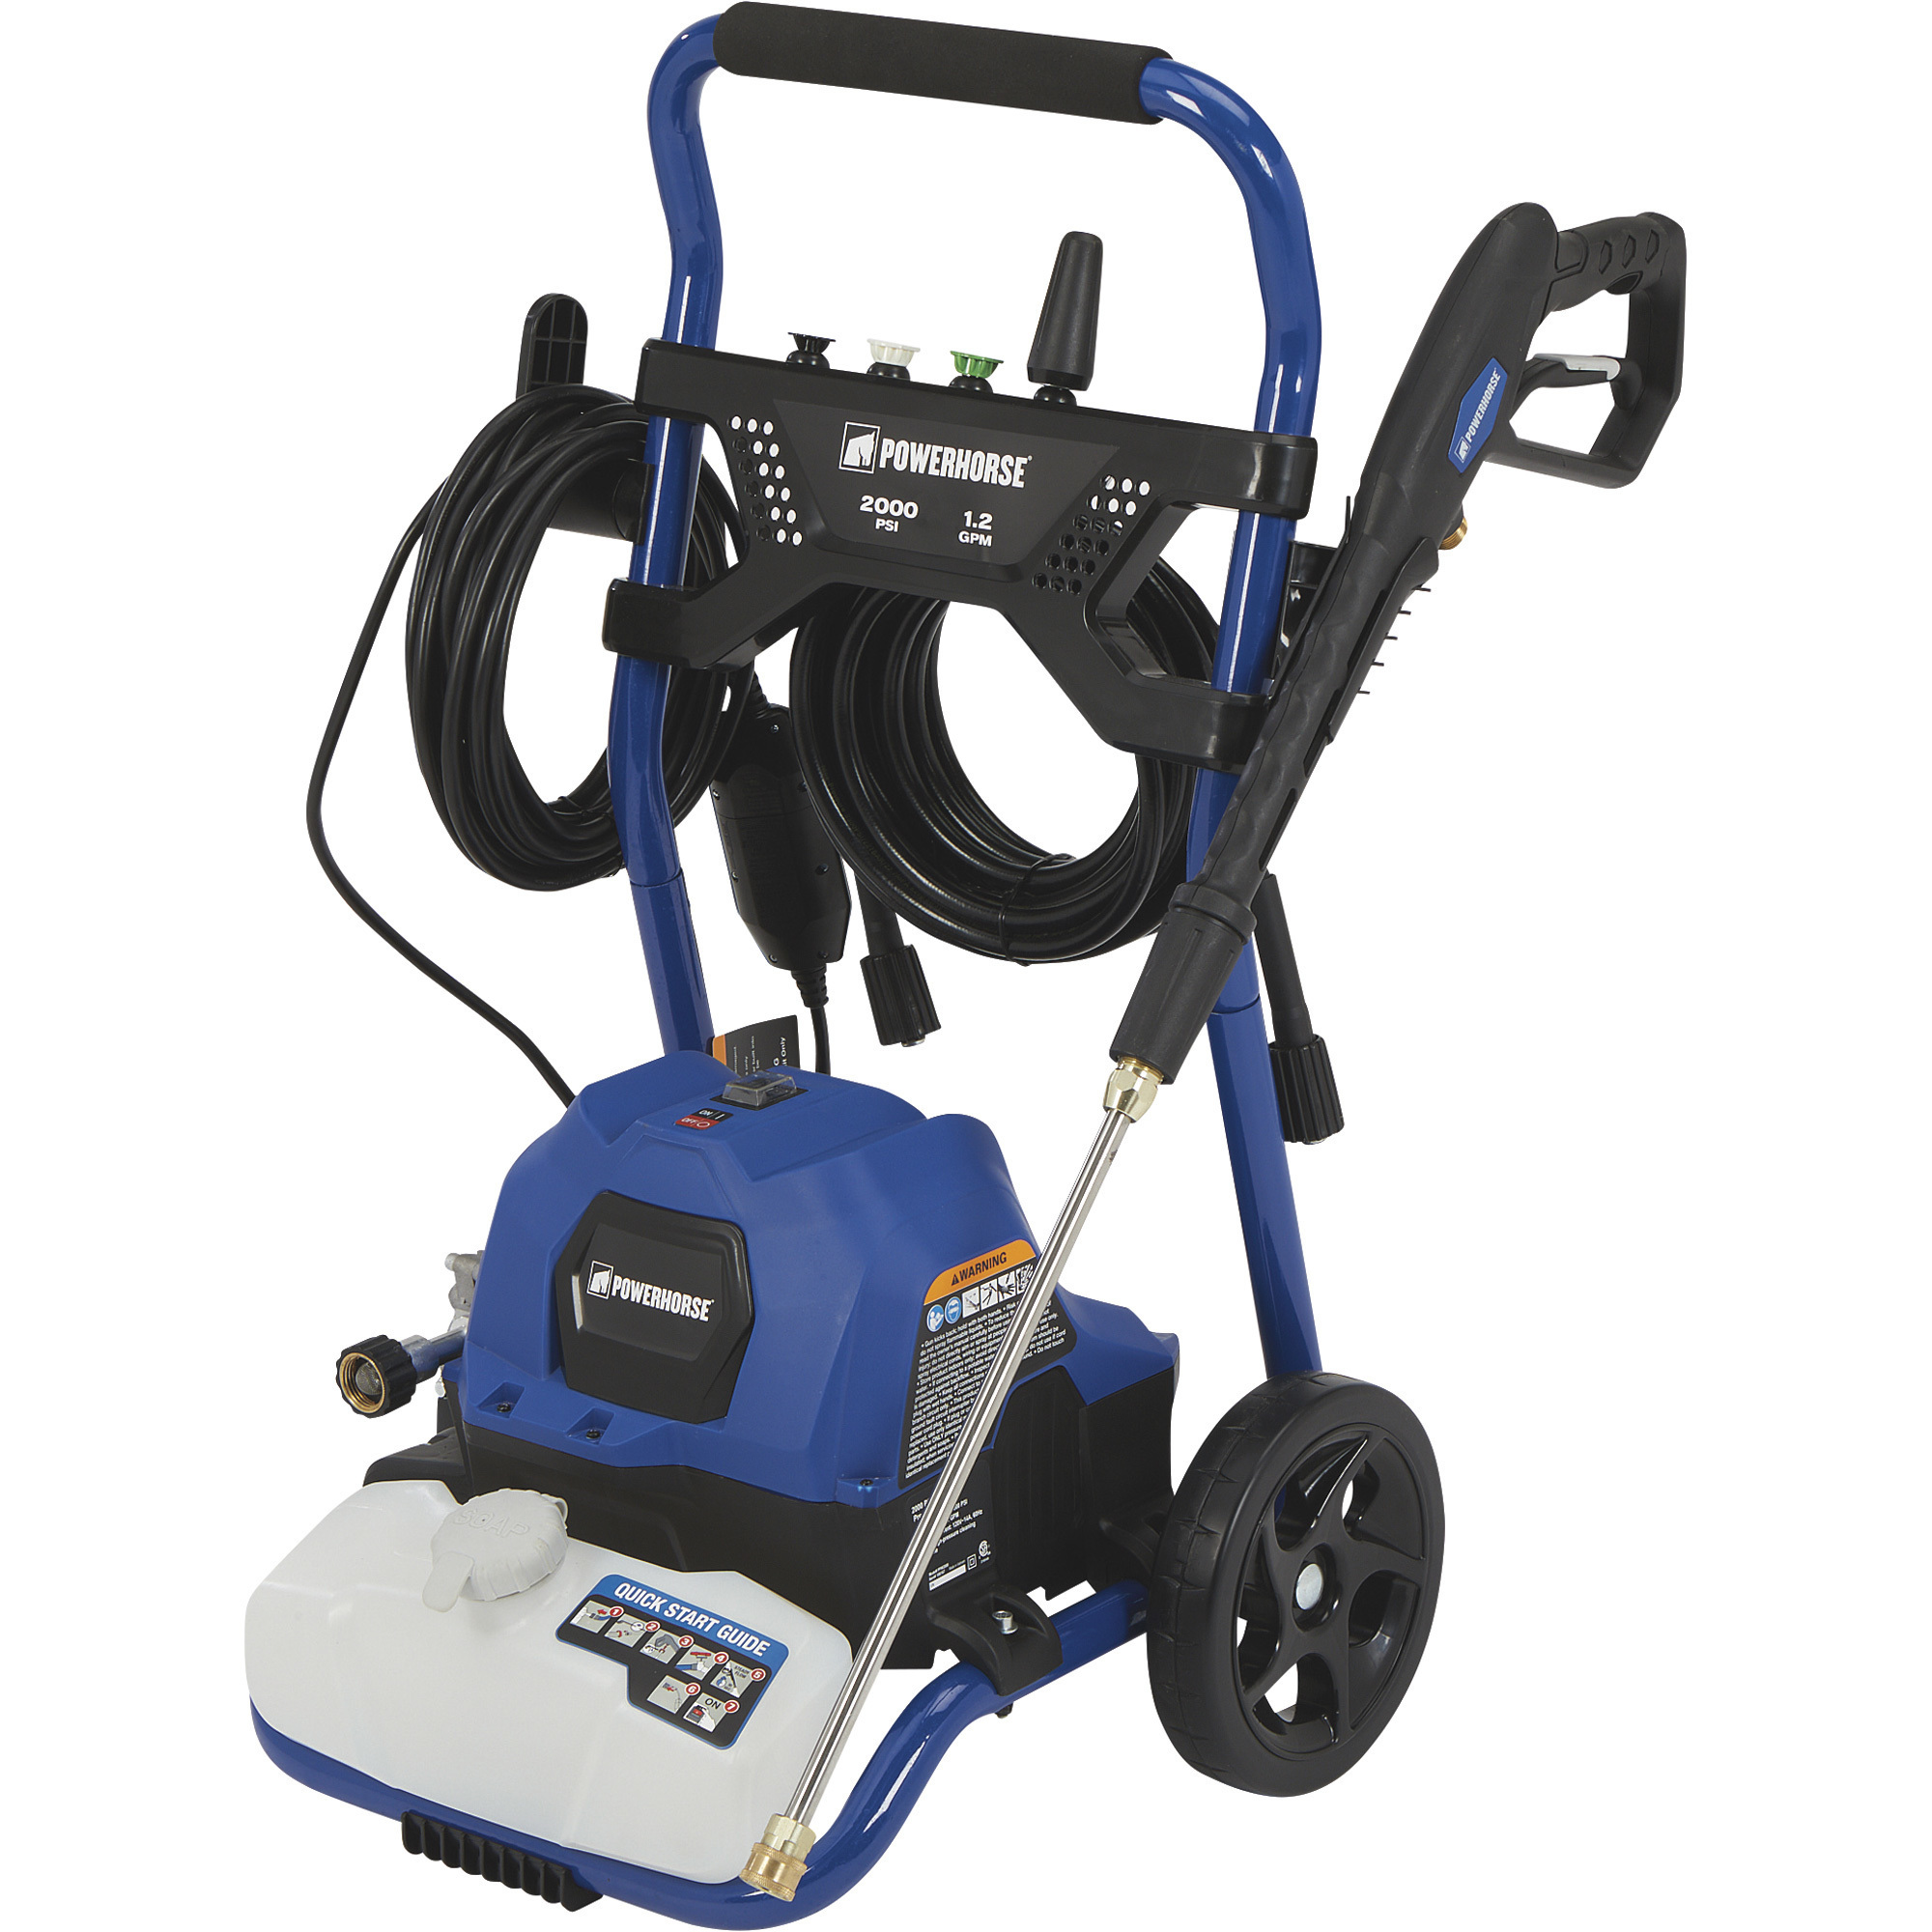 Powerhorse Electric Cold Water Pressure Washer â 2000 PSI, 1.2 GPM